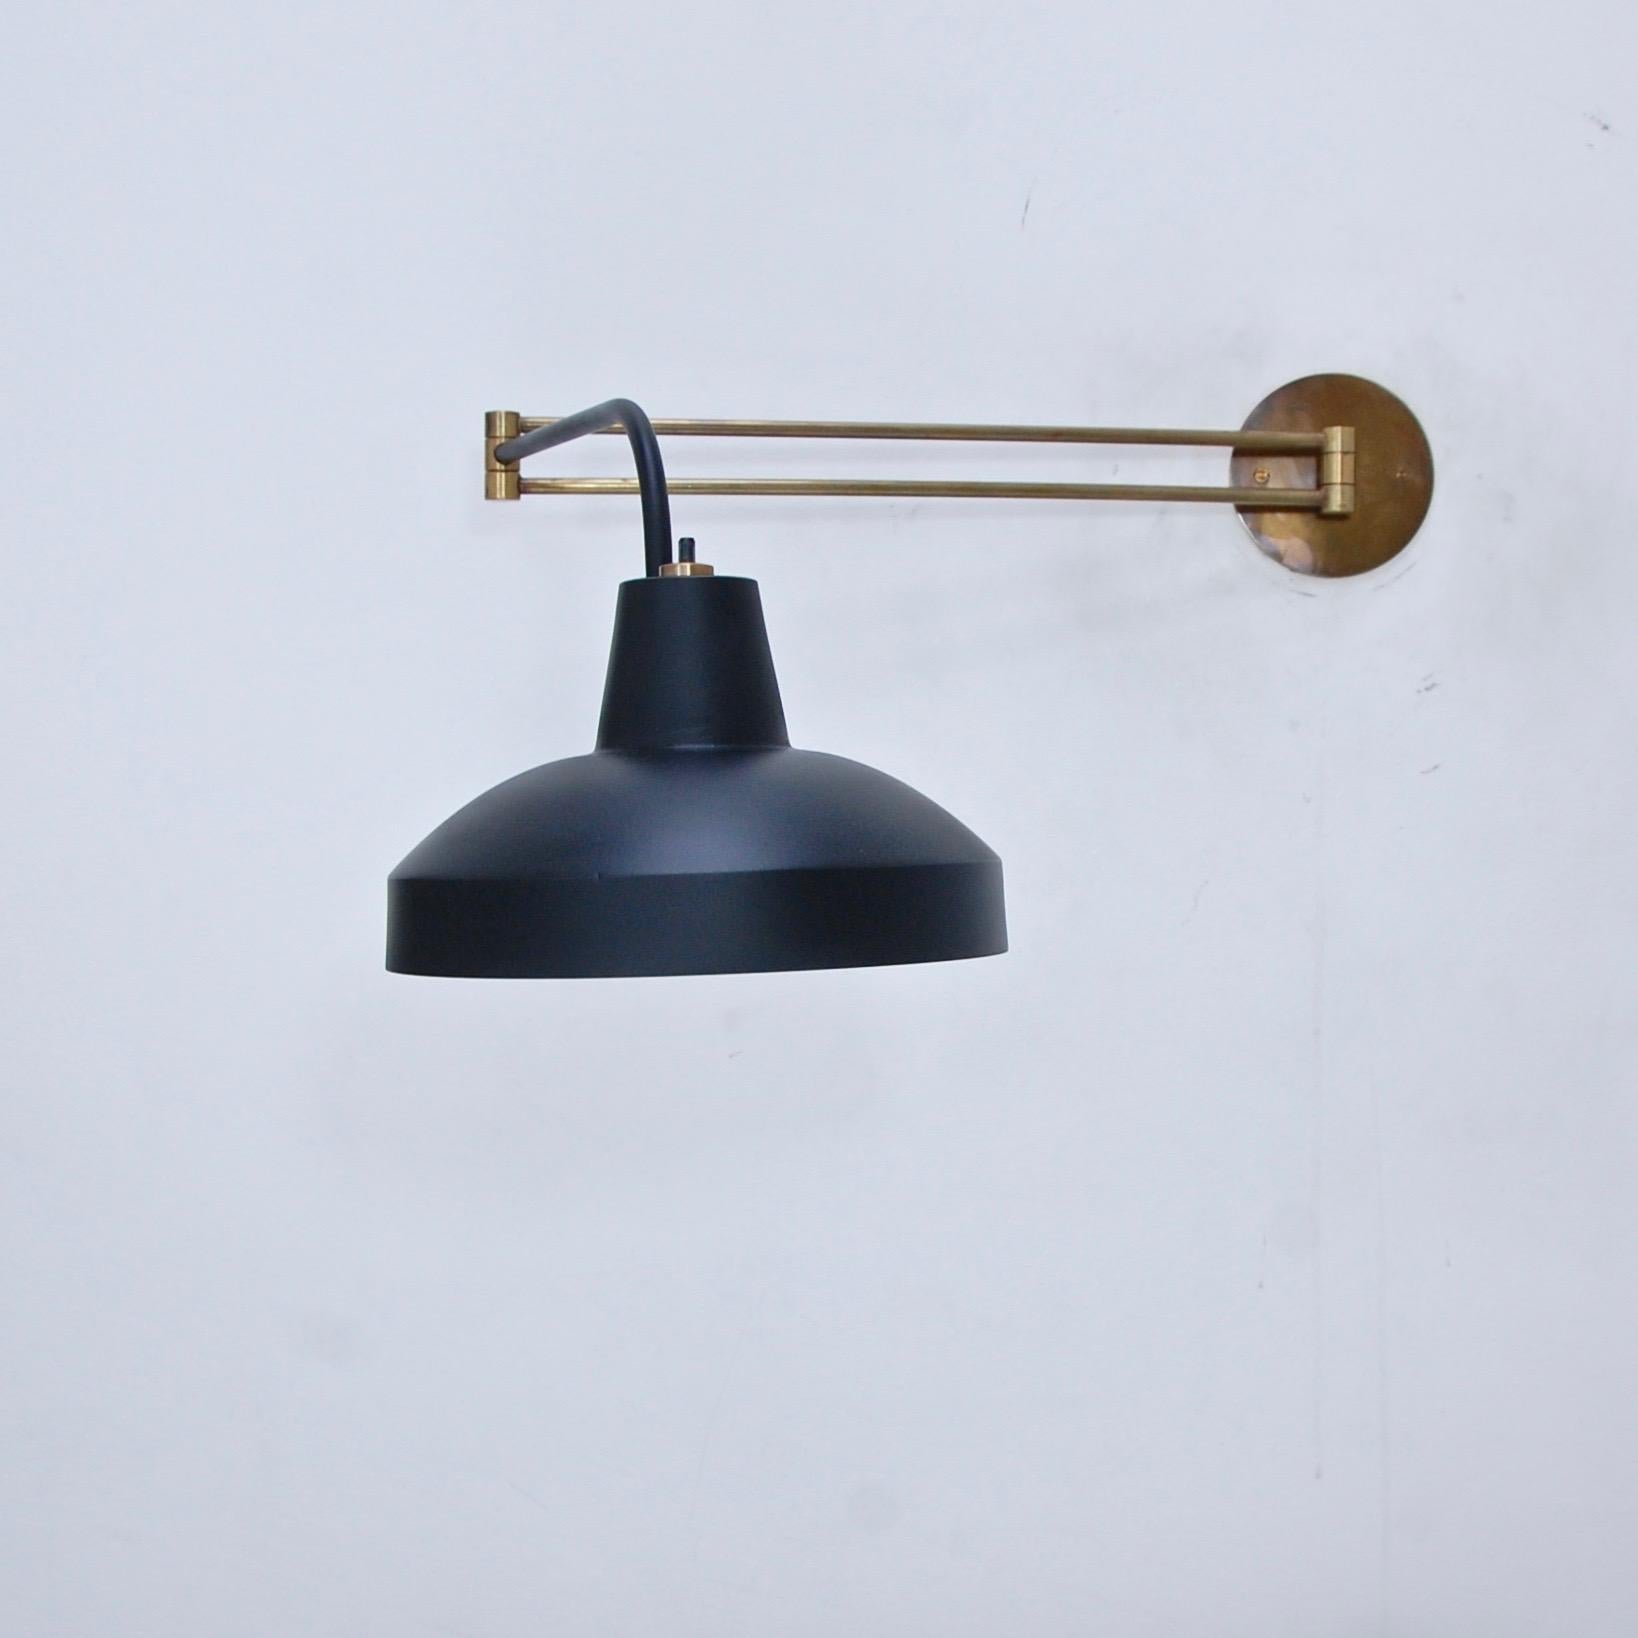 2 retractable Mid-Century Modern wall lights/sconces from Italy. Partially restored, patina lacquered brass, and painted aluminum. Single E26 based socket per sconce. Maximum wattage 75 watts per sconce. Back plate has 2 ¾” center to center mounting